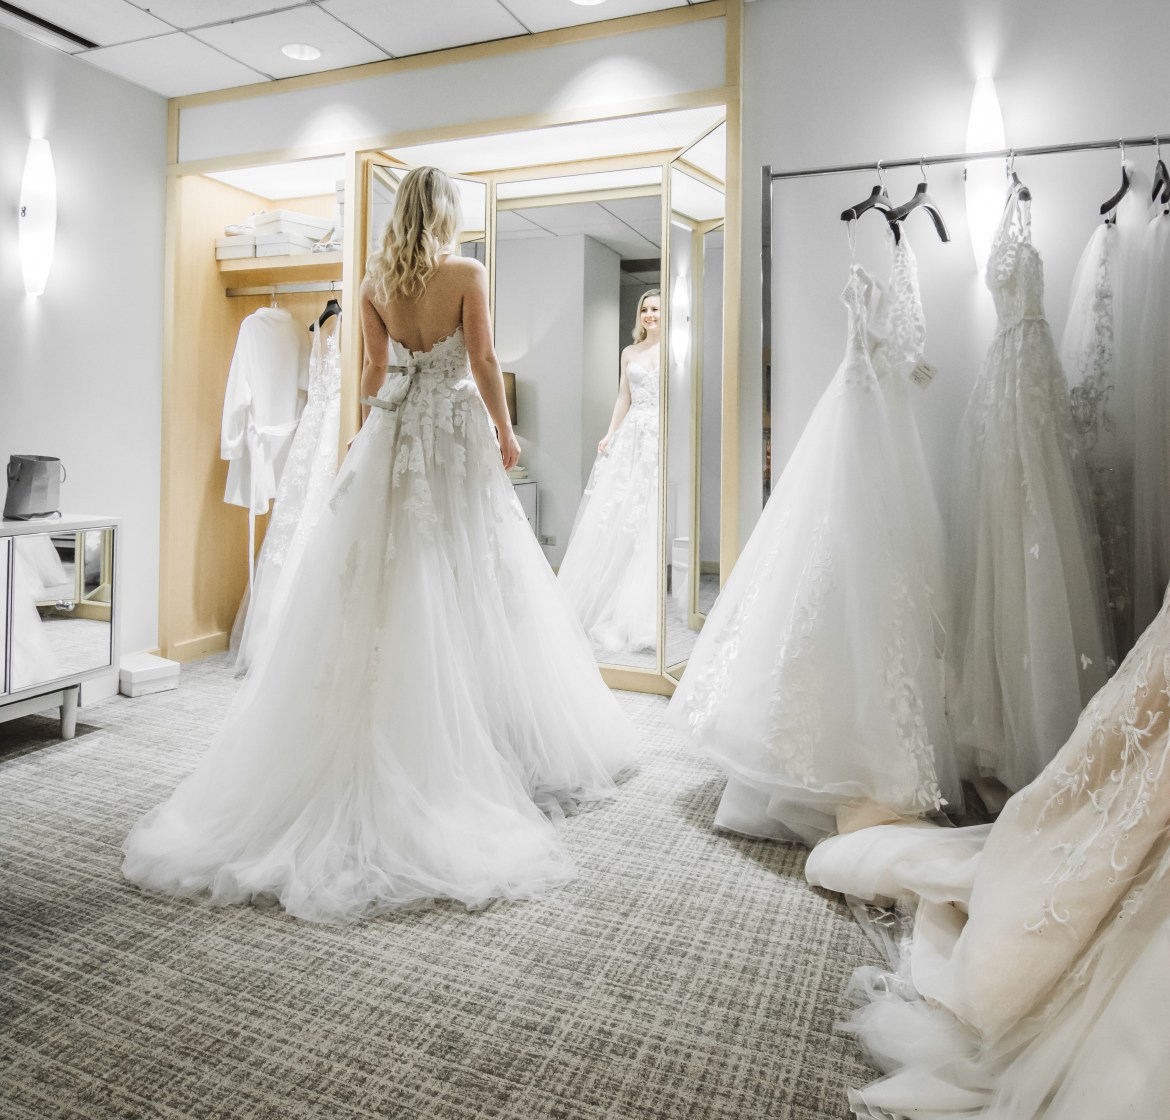 How To Shop For Wedding Dress (1 of 9)